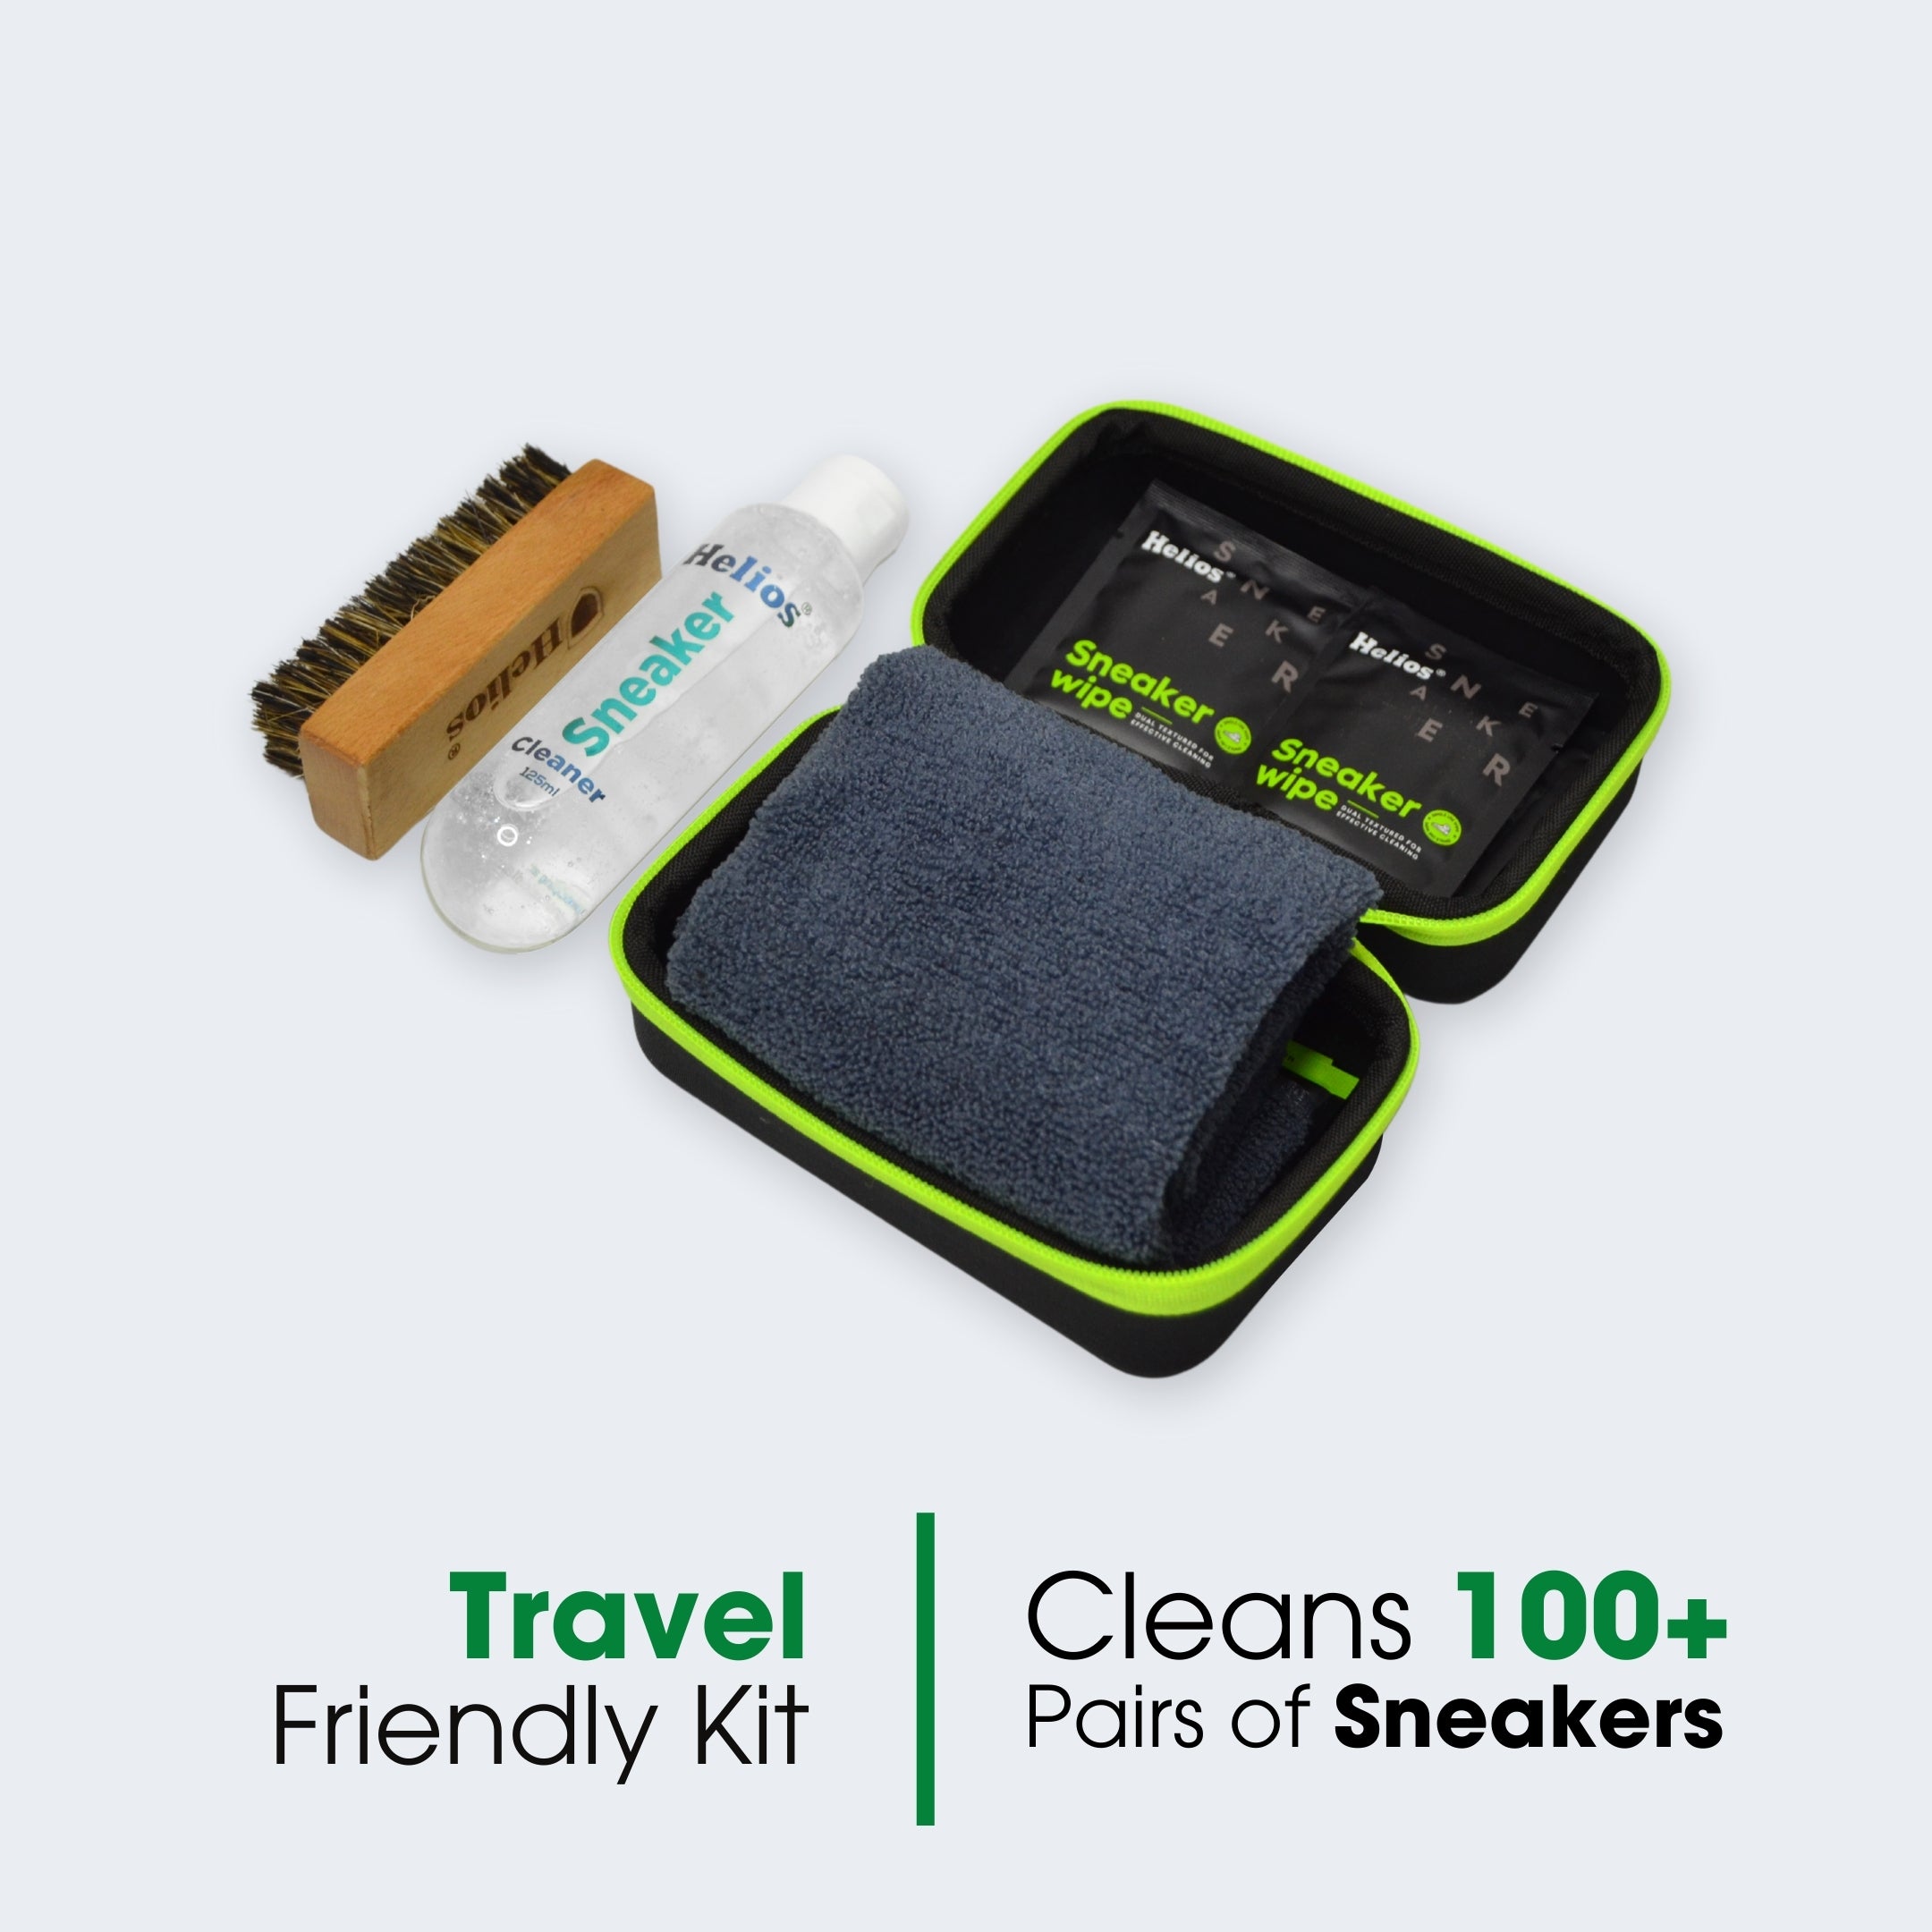 Helios On The Go Sneaker Care Kit